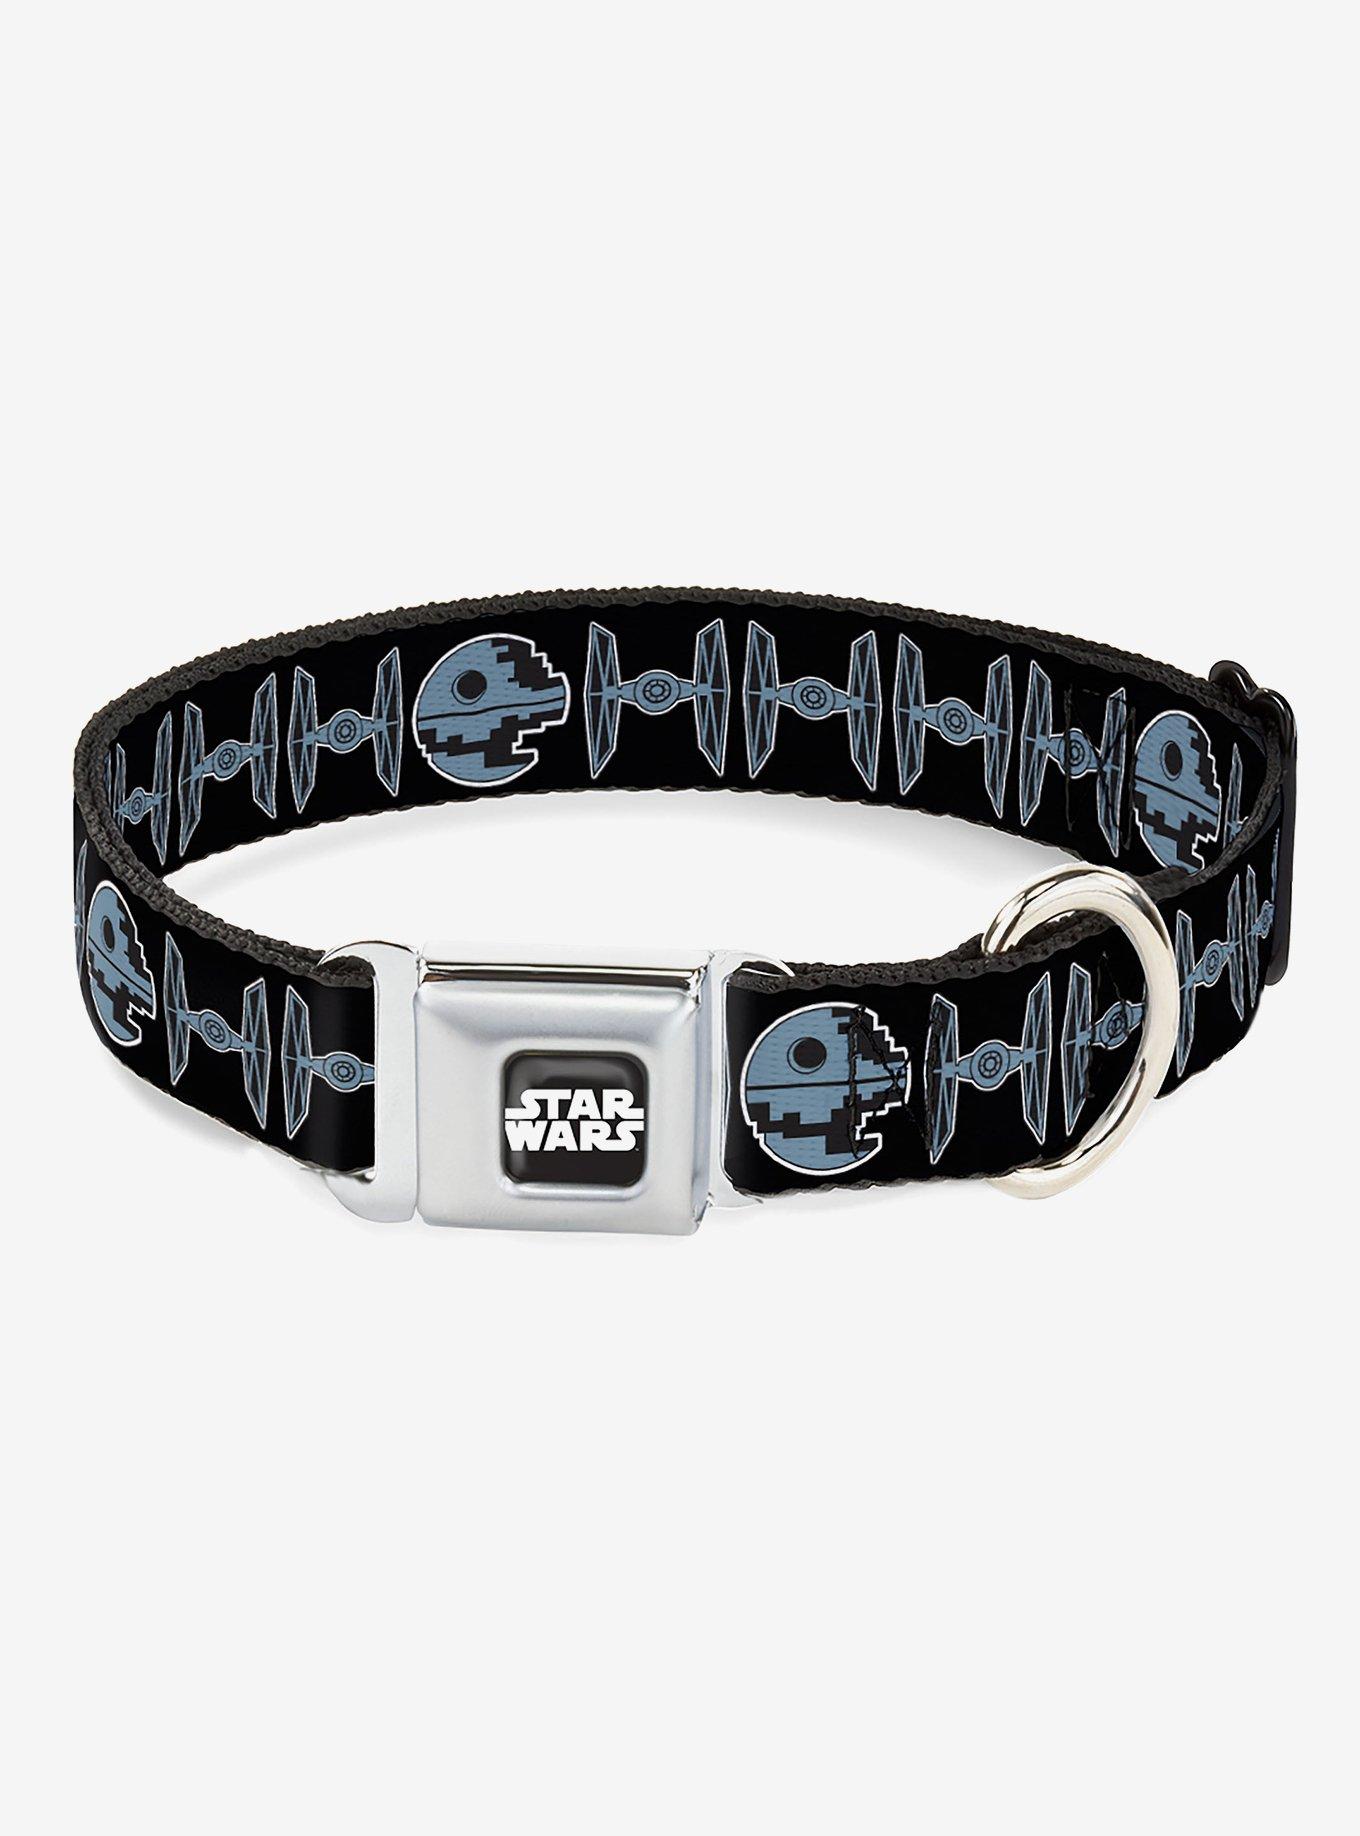 Star Wars Death Star and TIE Fighters Seatbelt Buckle Dog Collar, , hi-res